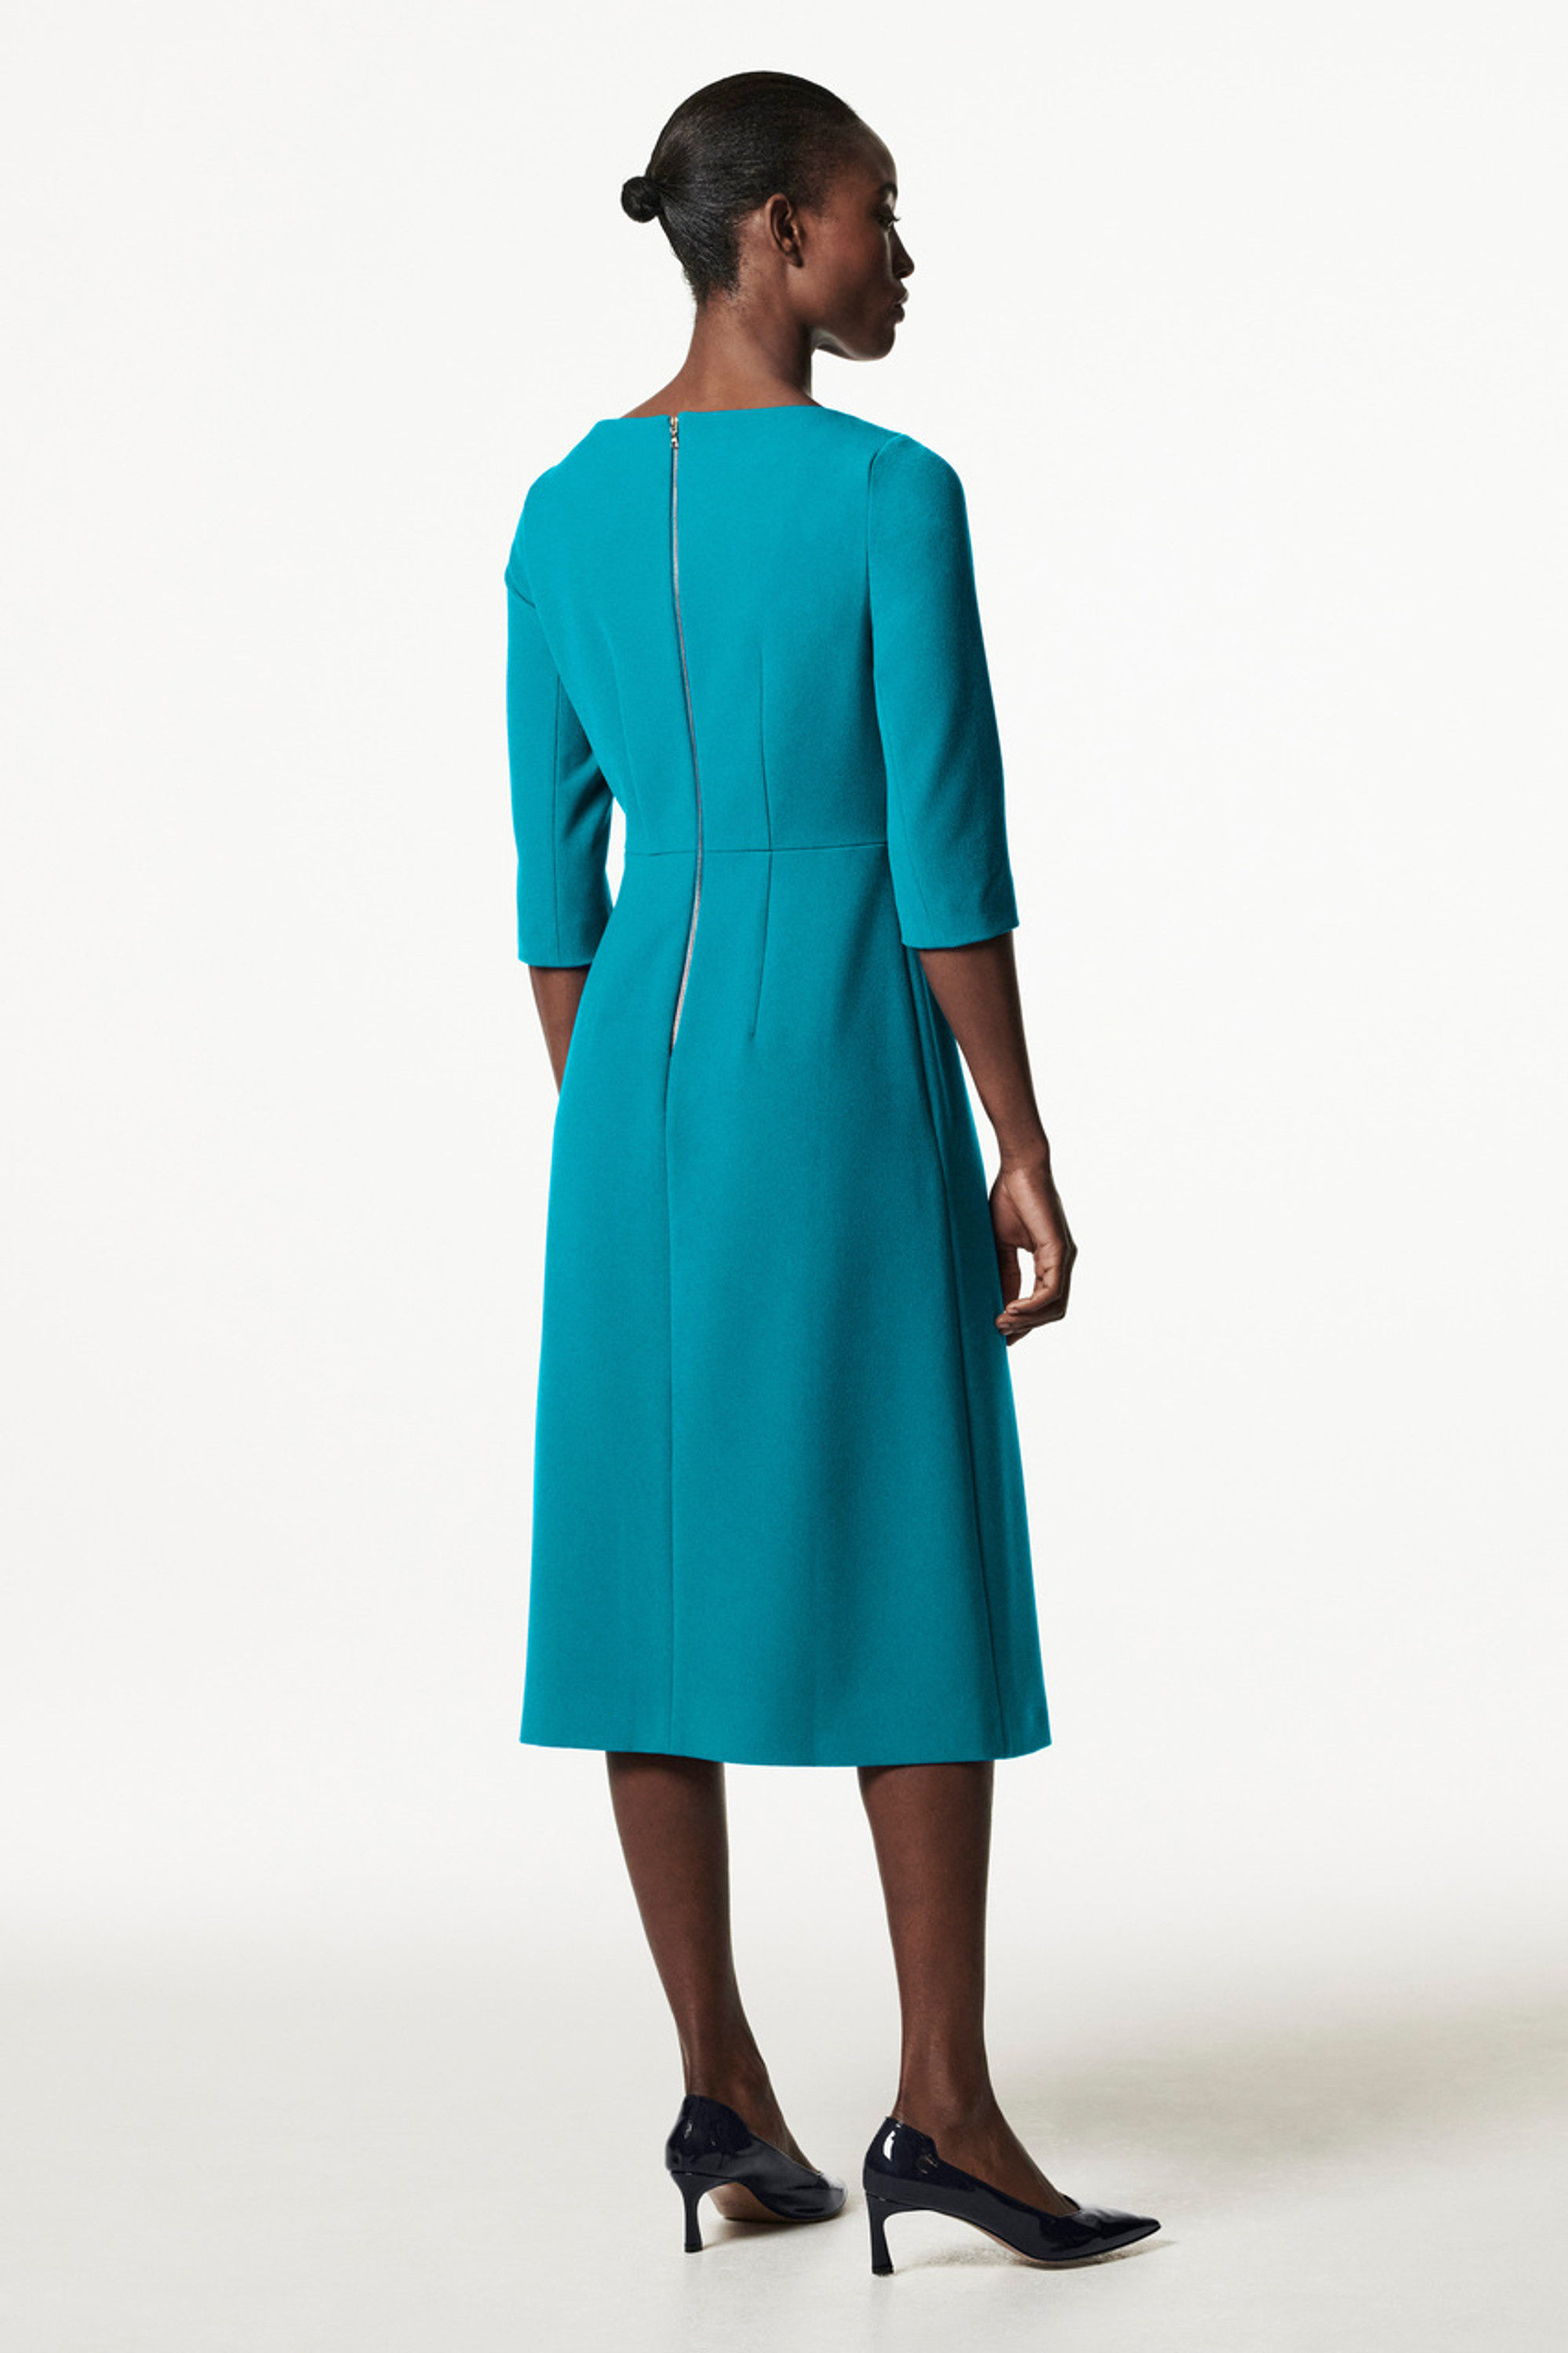 Maida Vale Dress Lagoon Blue Sculpt Stretch Crepe - Welcome to the Fold LTD